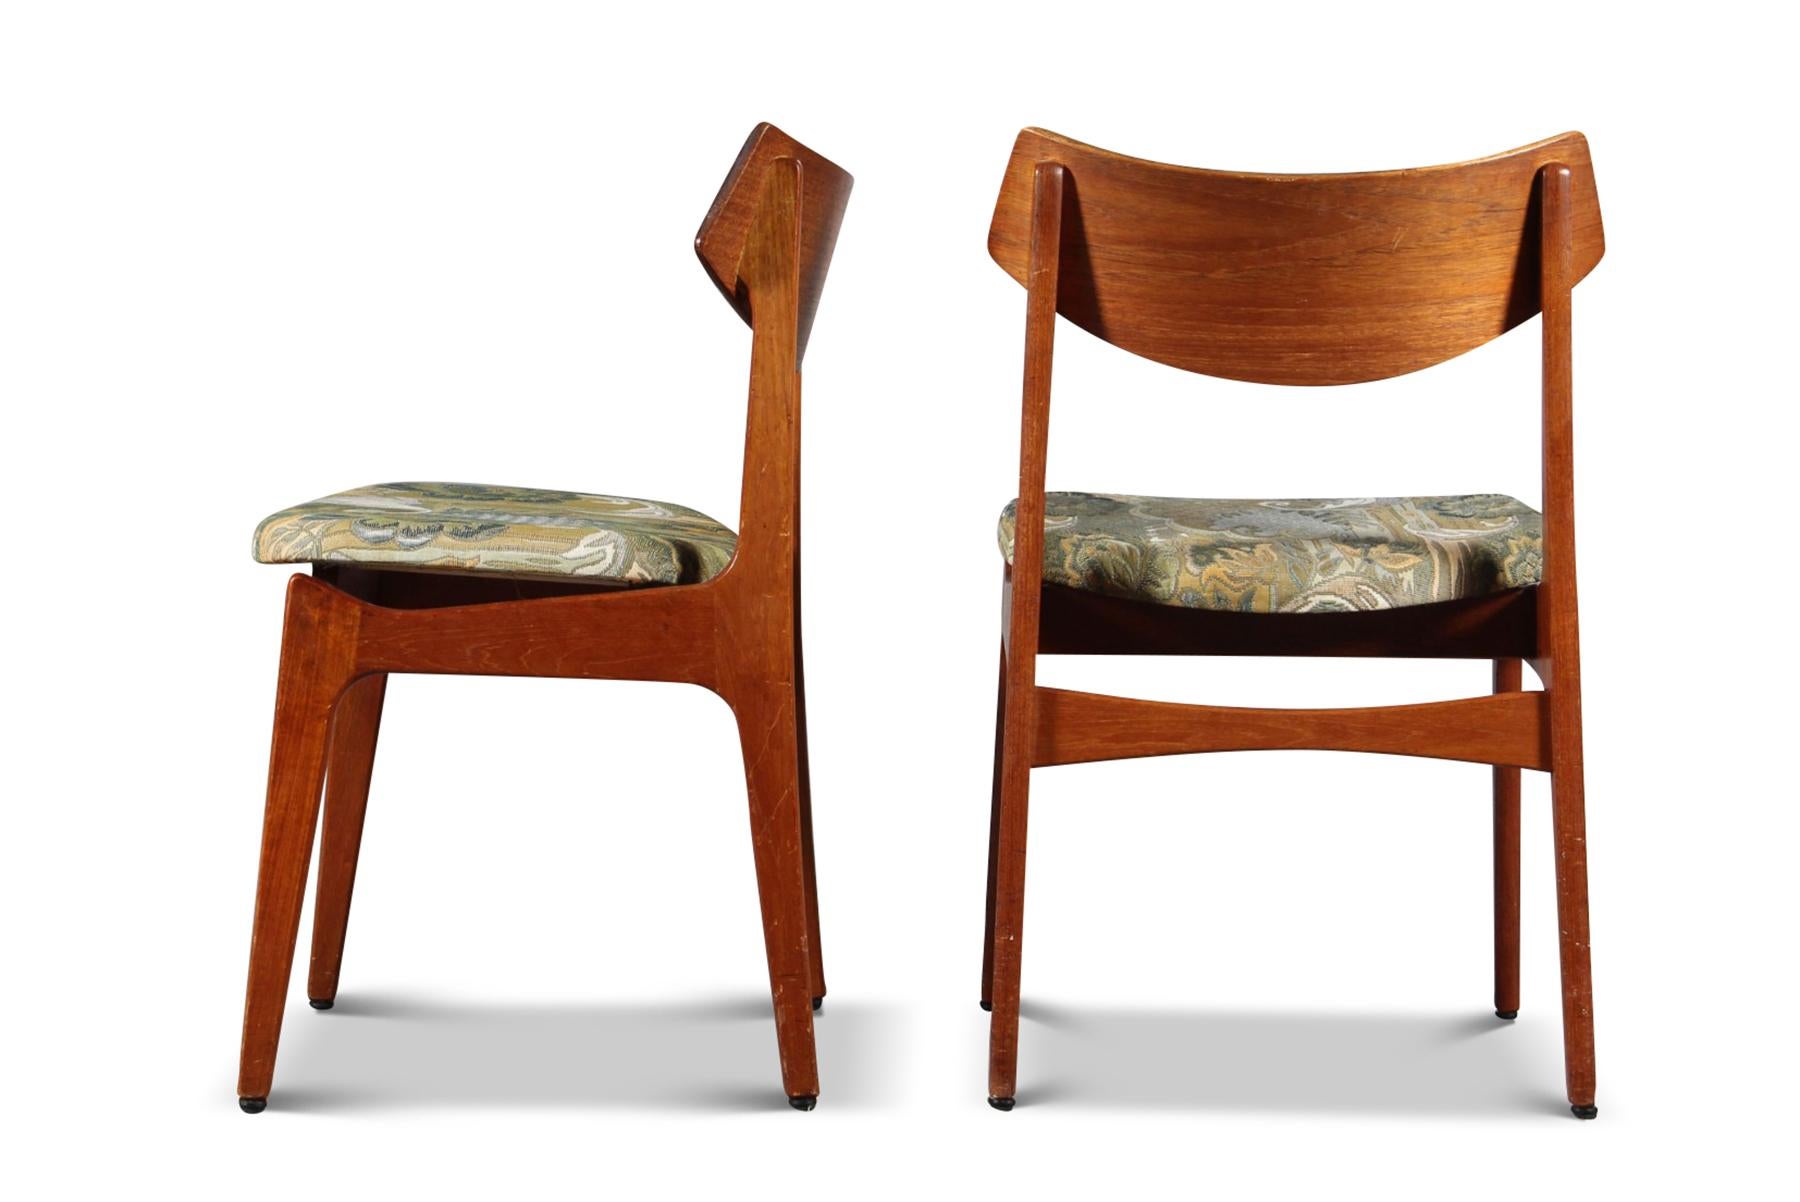 Origin: Denmark
Designer: Unknown
Manufacturer: Funder Schmidt + Madsen
Era: 1960s
Materials: Teak


Condition:
Frames in excellent original condition. Price includes new upholstery in your choice of fabric.